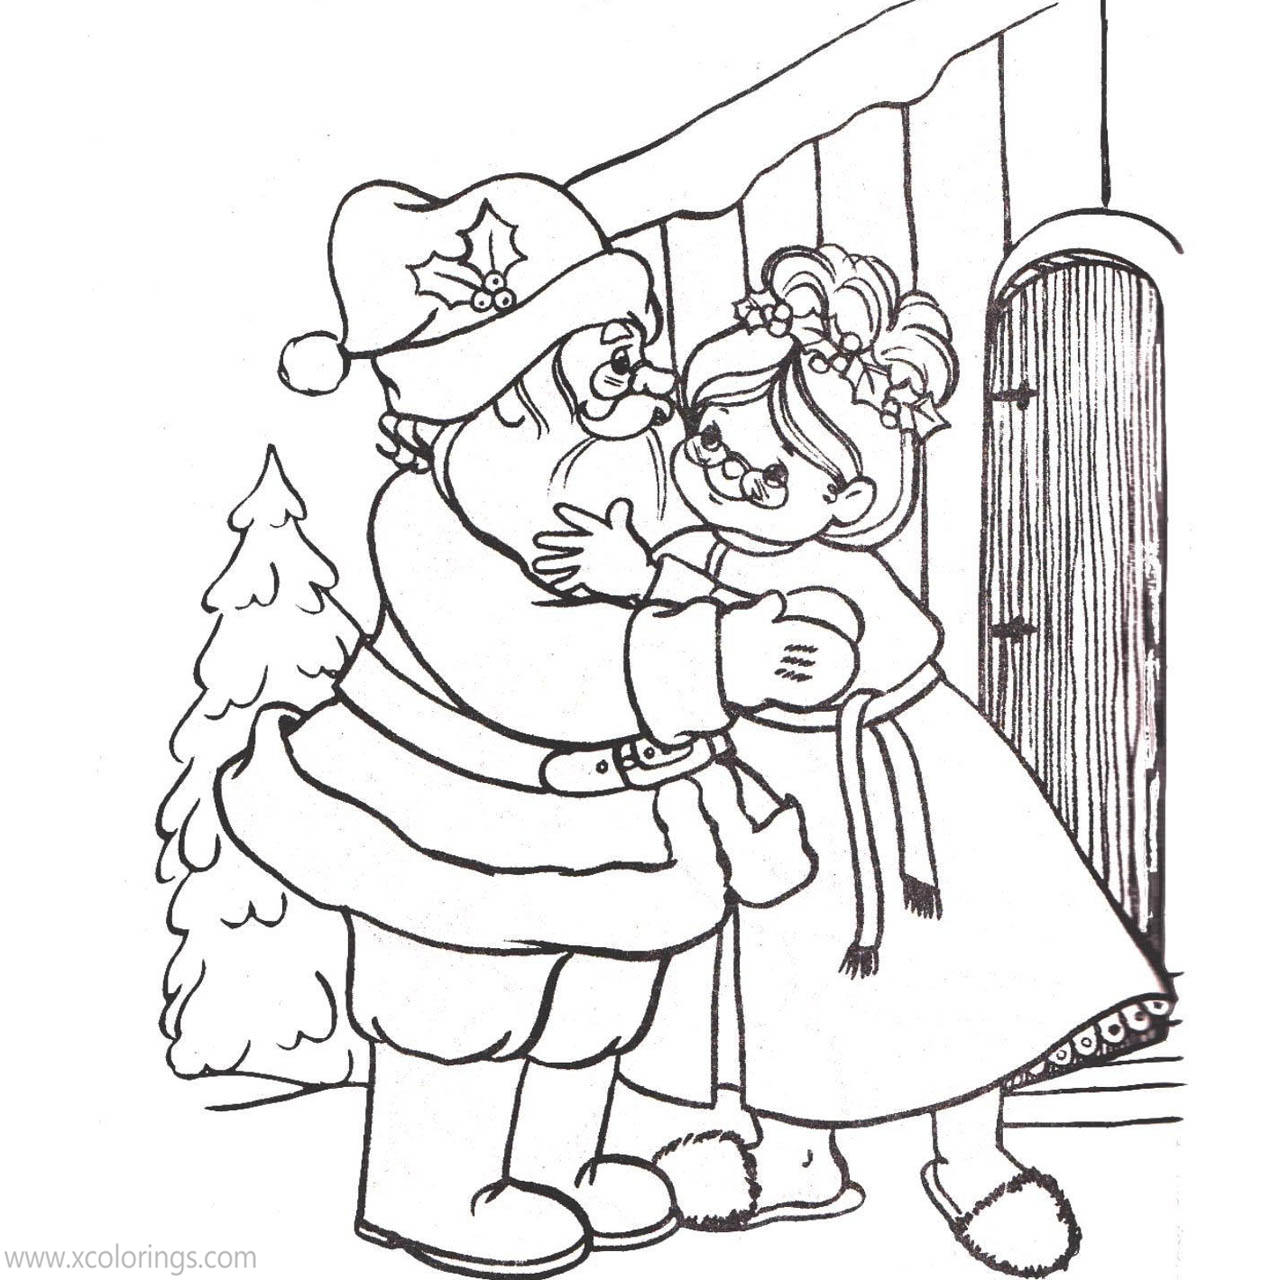 Free Mr. Kissing Mrs. Claus Coloring Pages printable